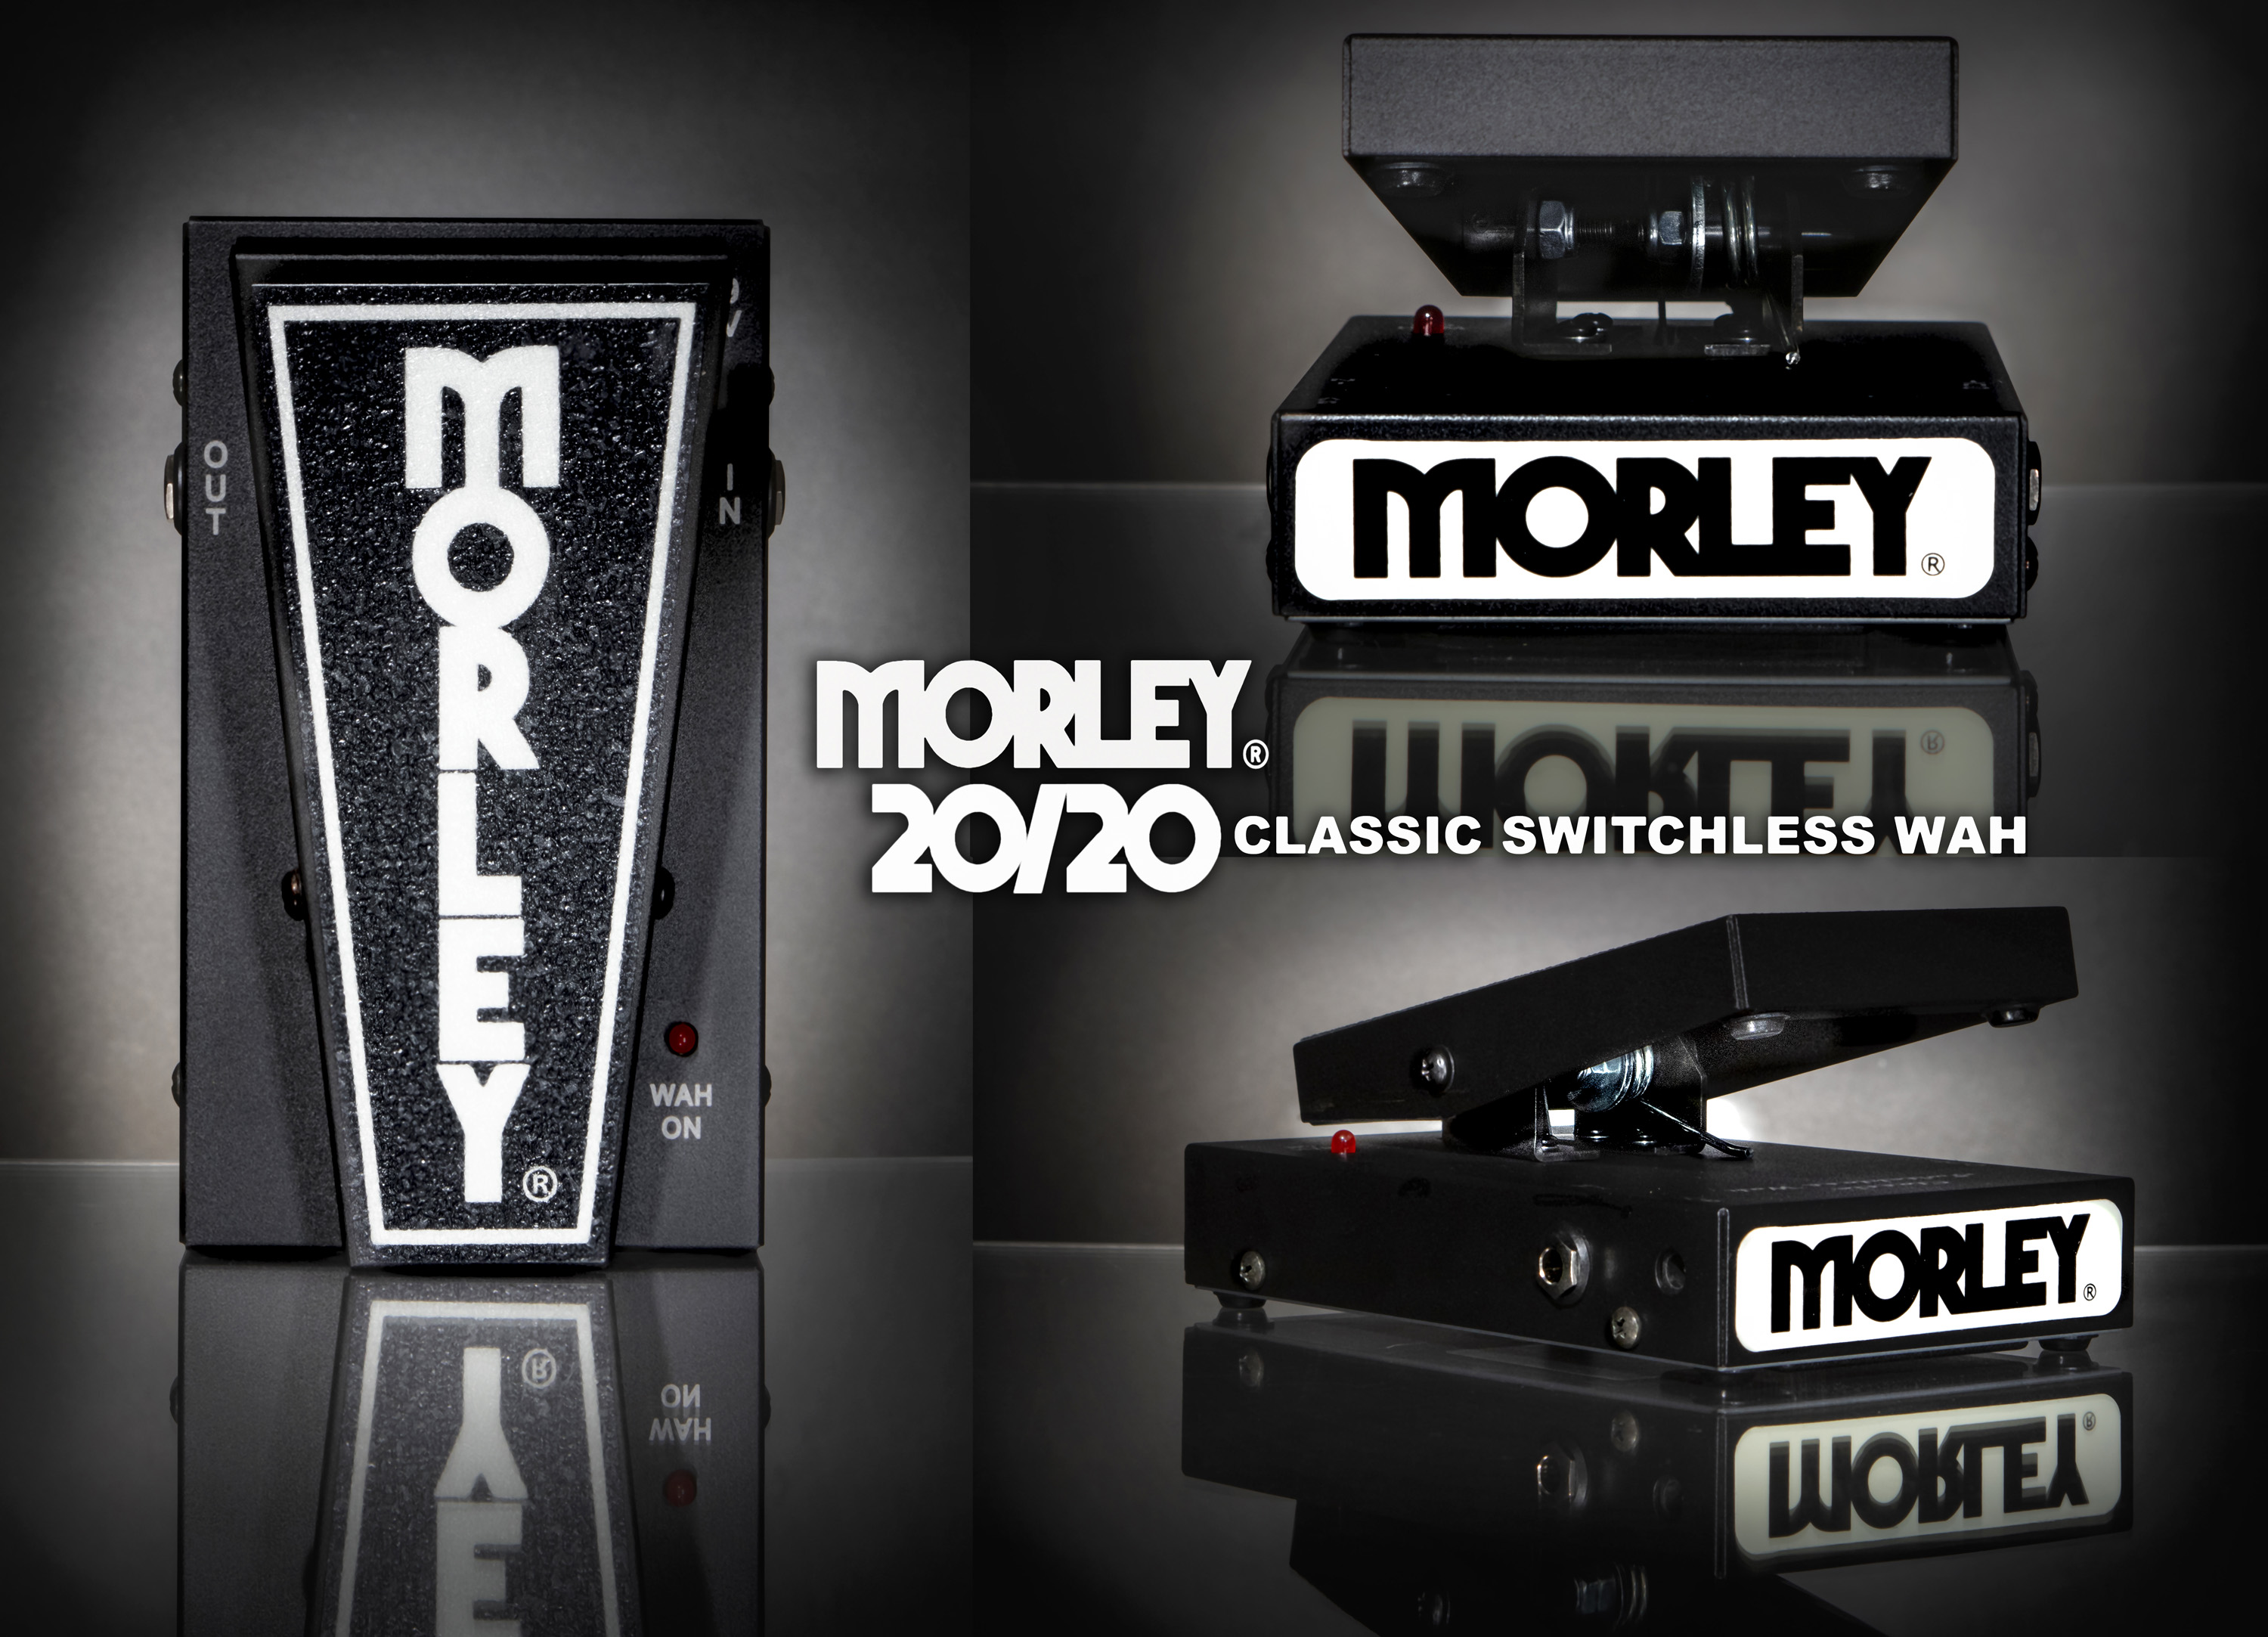 Mini Classic Switchless Wah Press Release – Morley